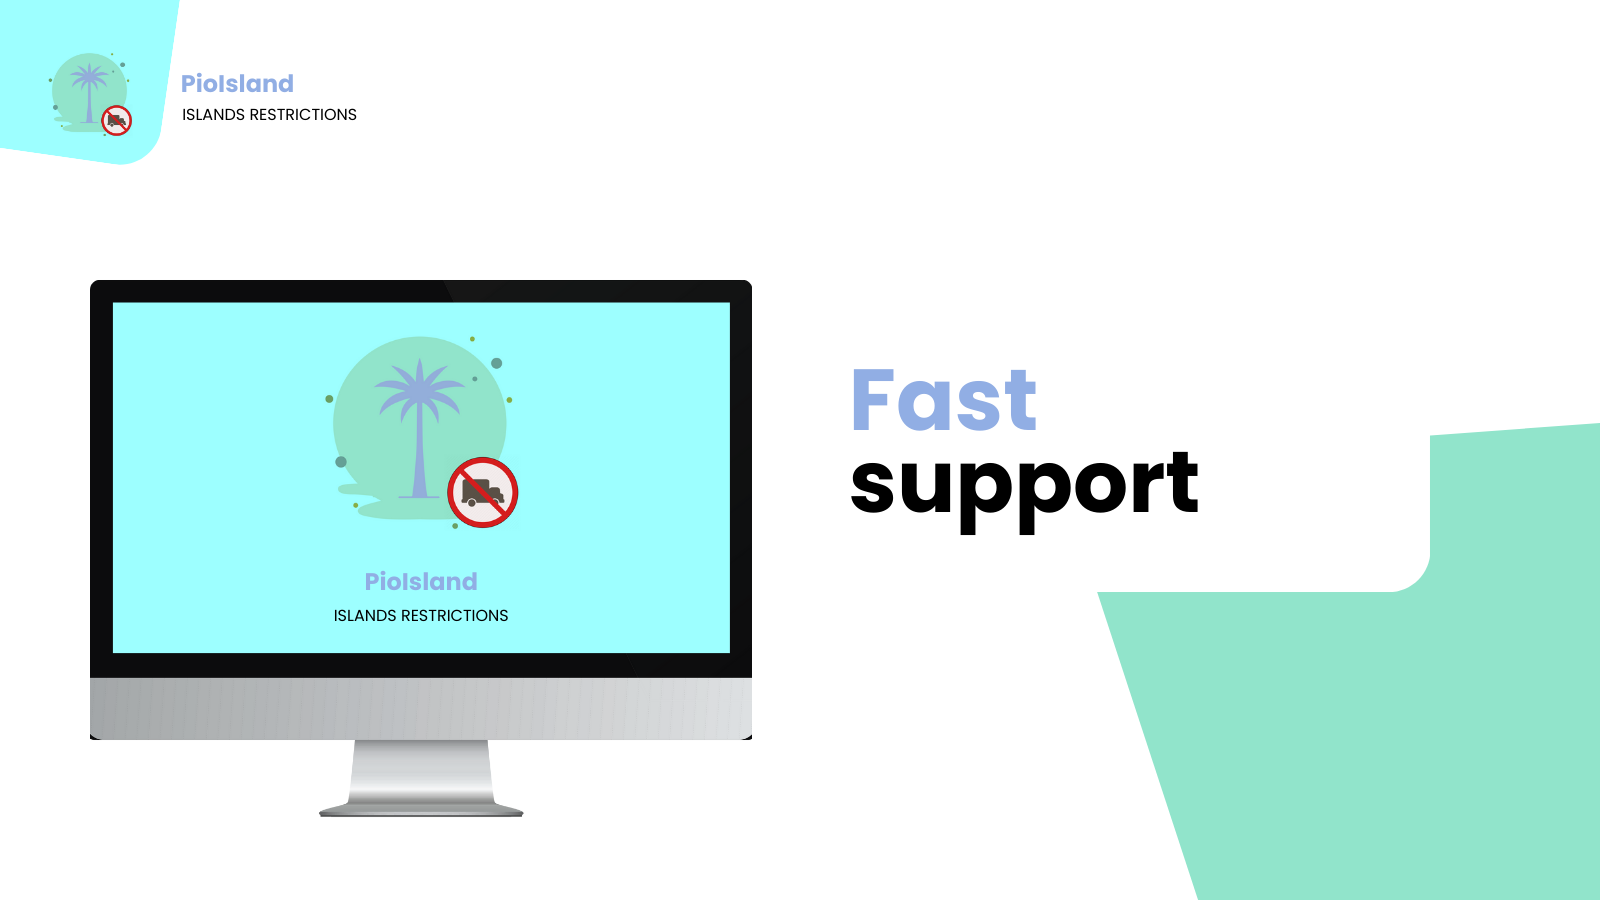 Fast support